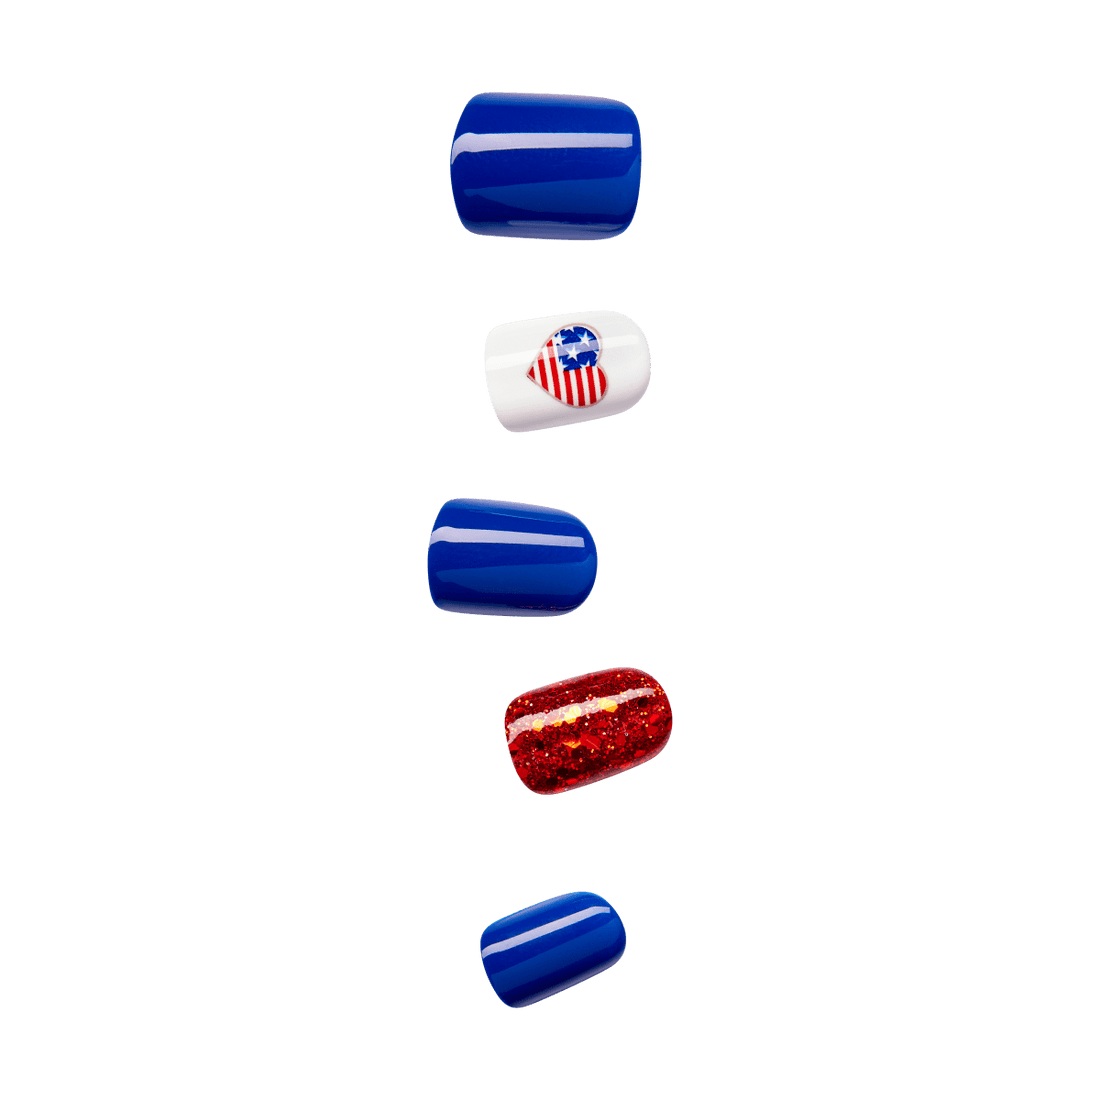 imPRESS nails in squoval shapes featuring various fourth of July colors and flag designs